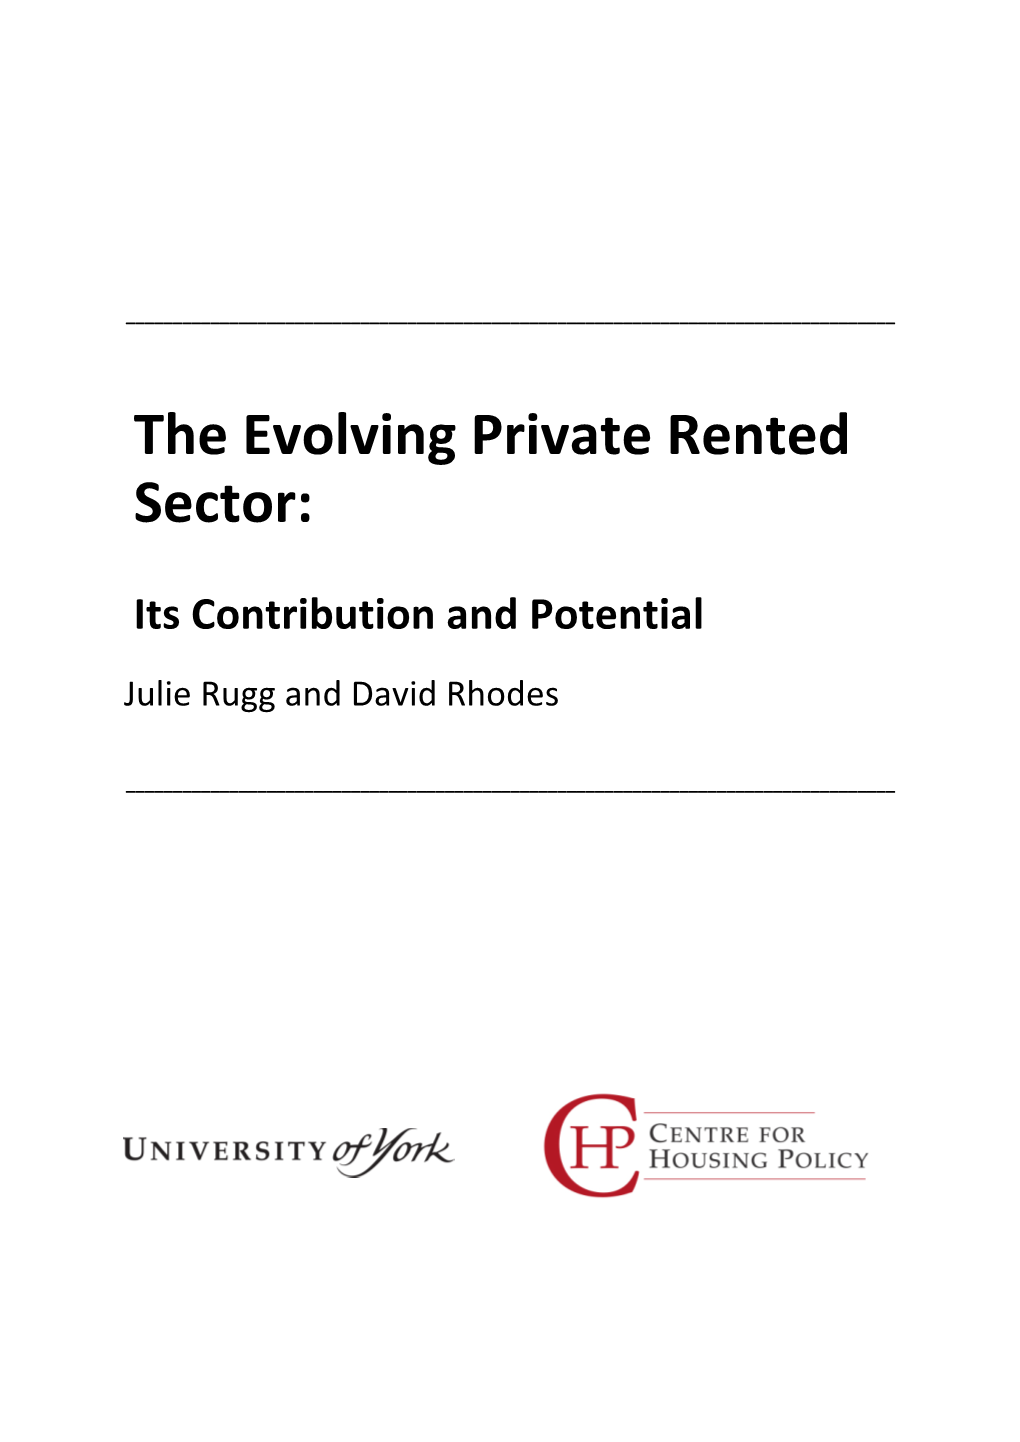 The Evolving Private Rented Sector